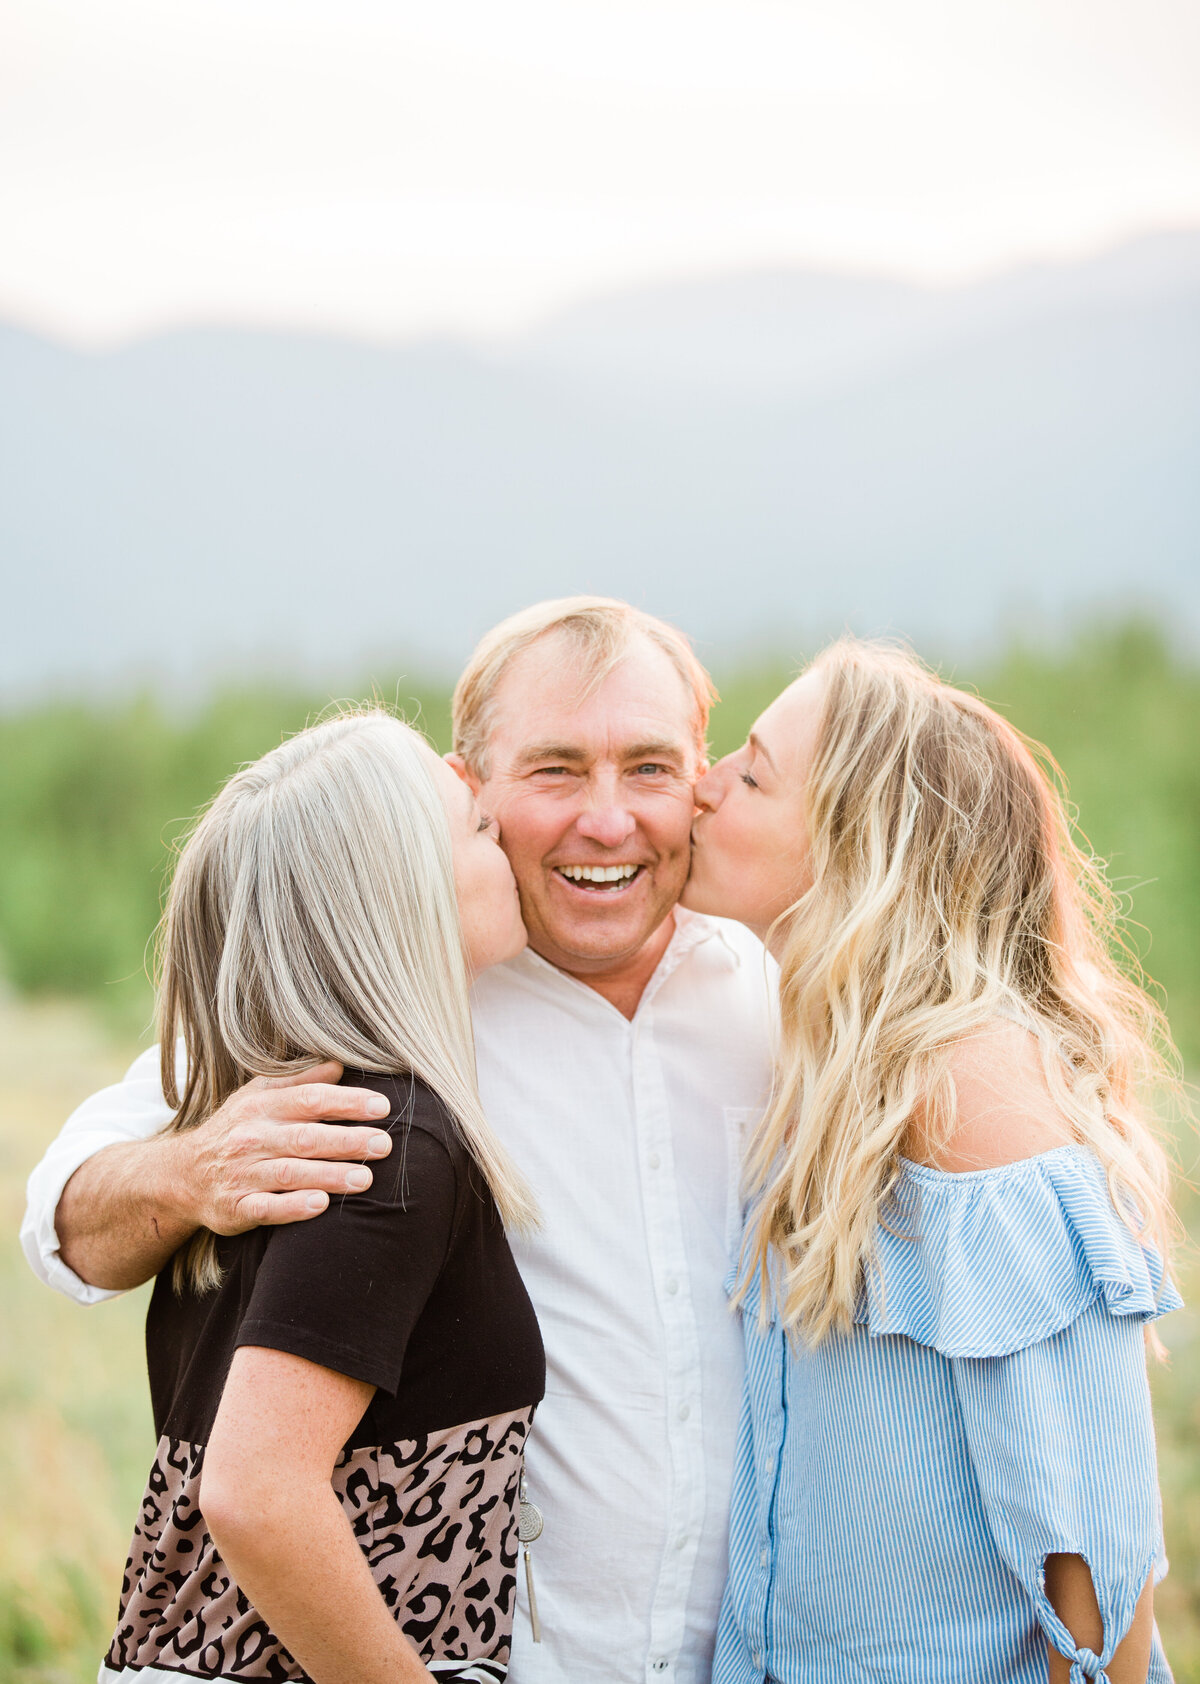 A dad is receiving a kiss on the cheek by each of his adult daughters